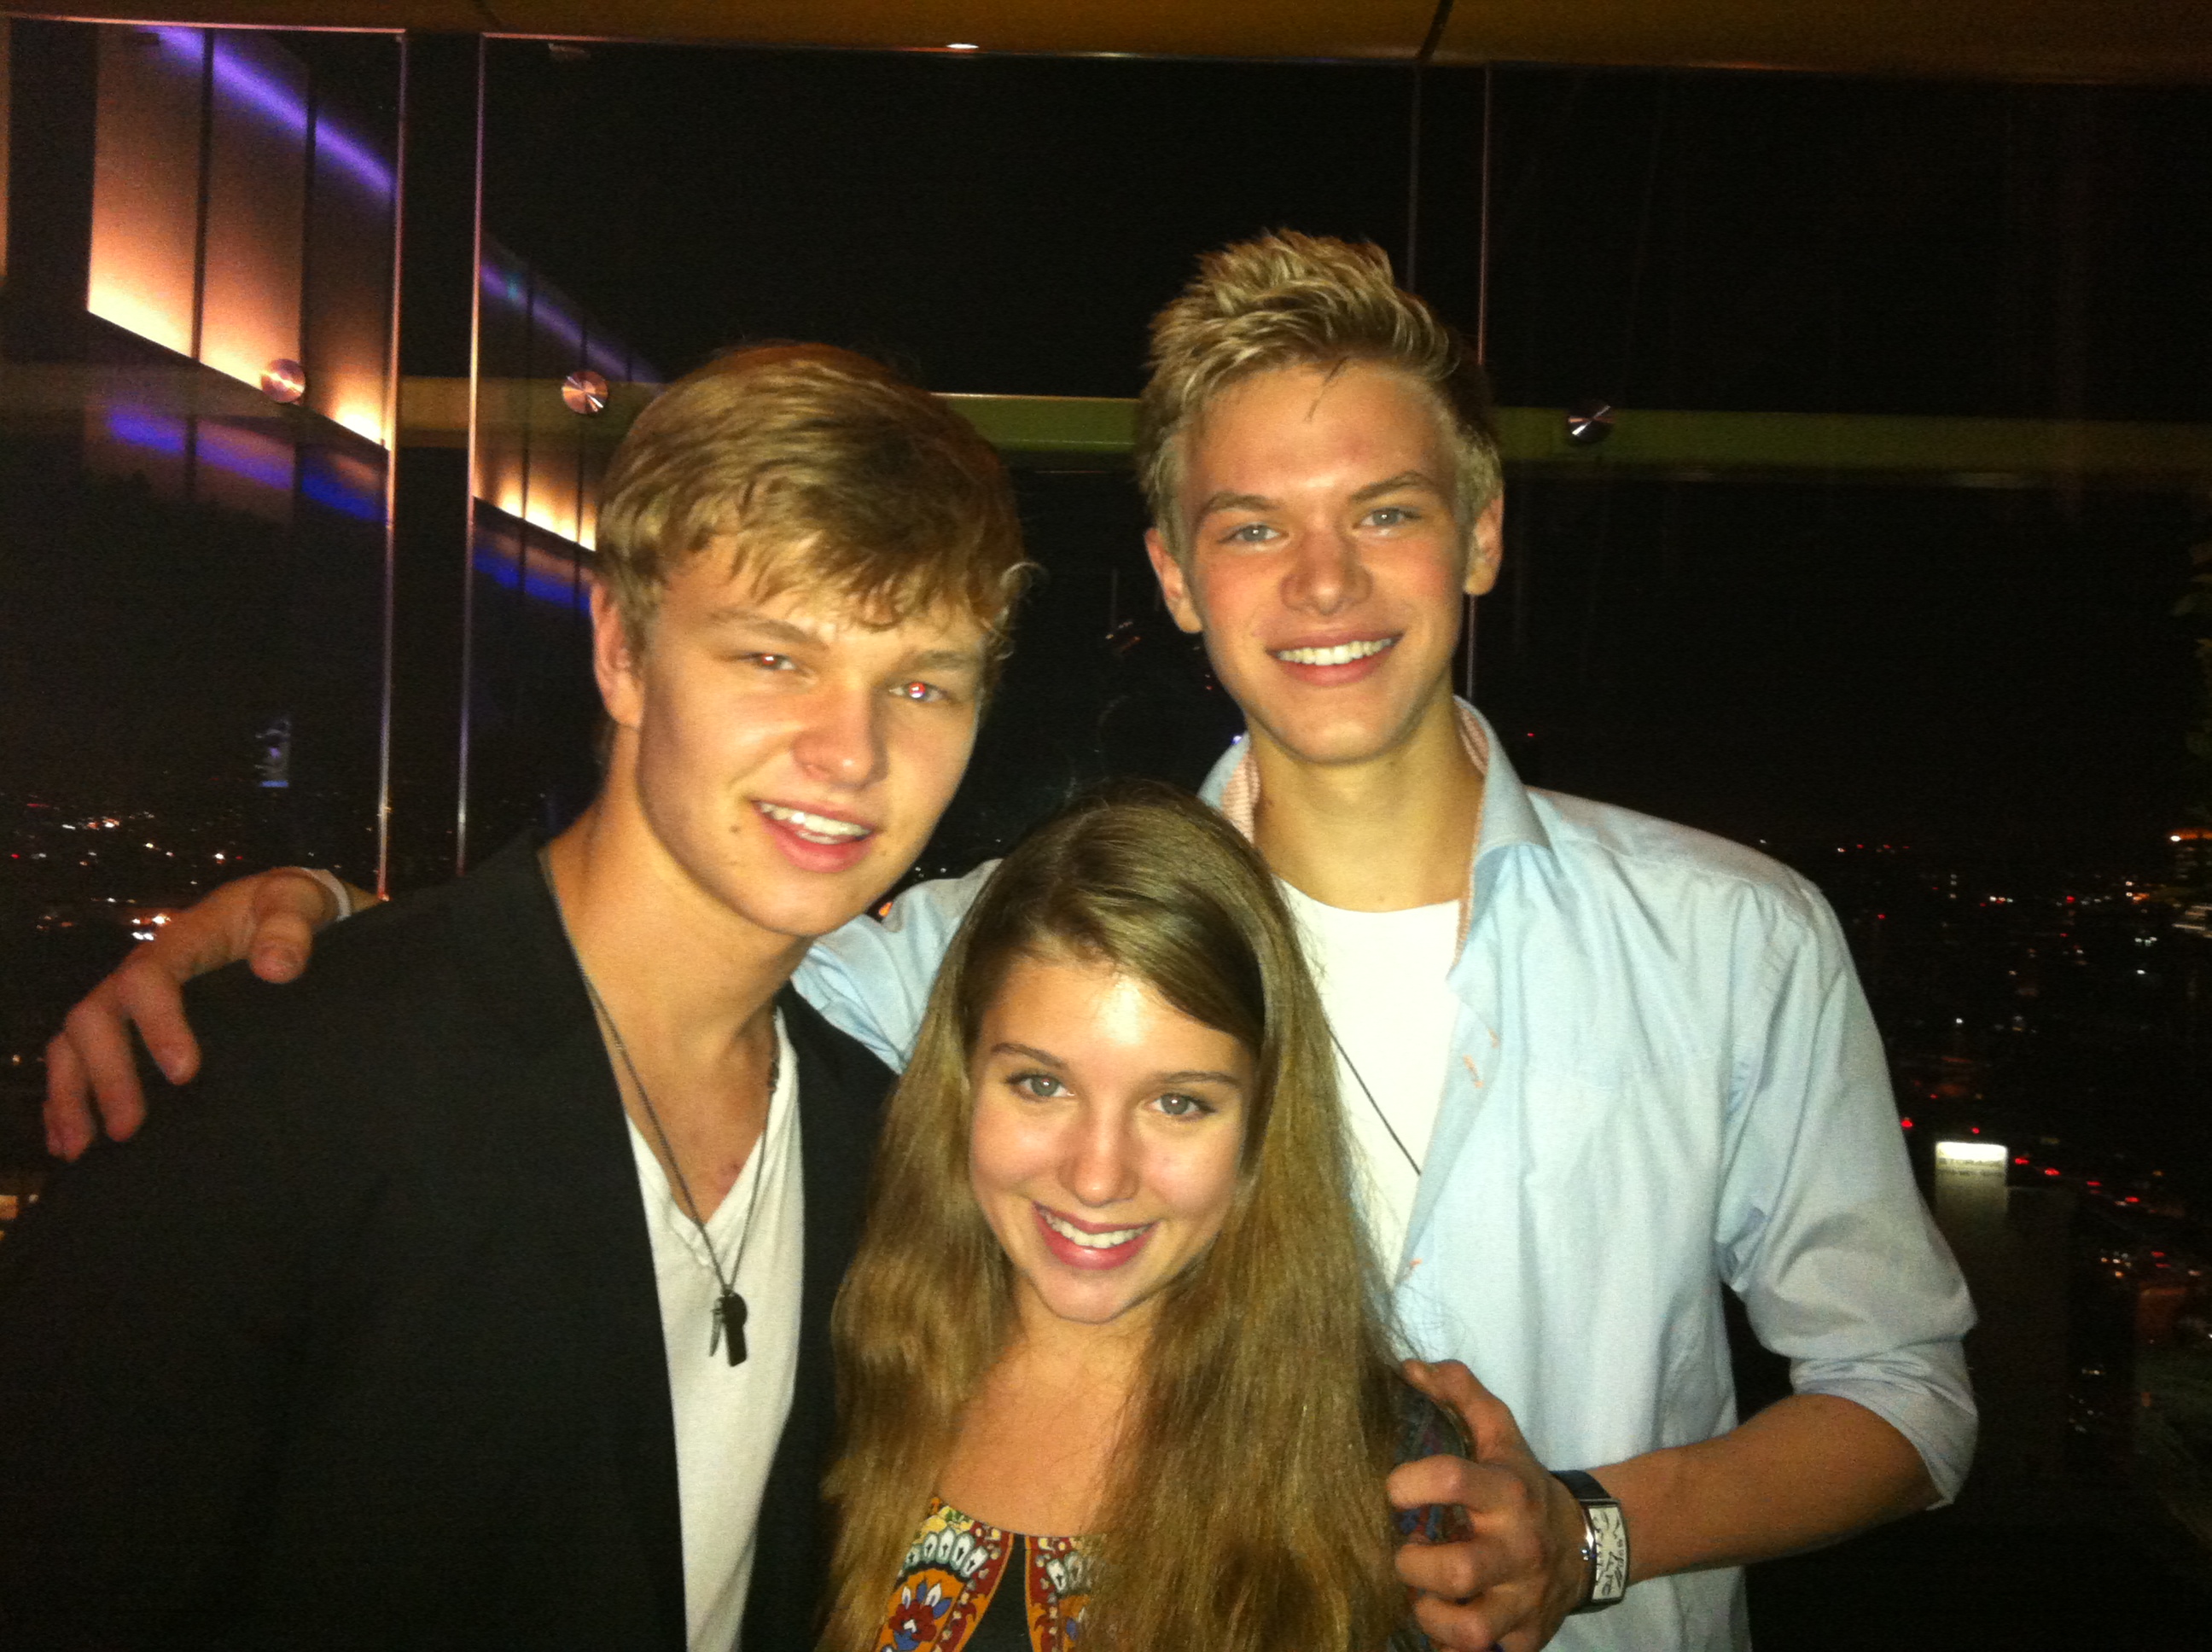 Paris with Kenton Duty from Shake It Up